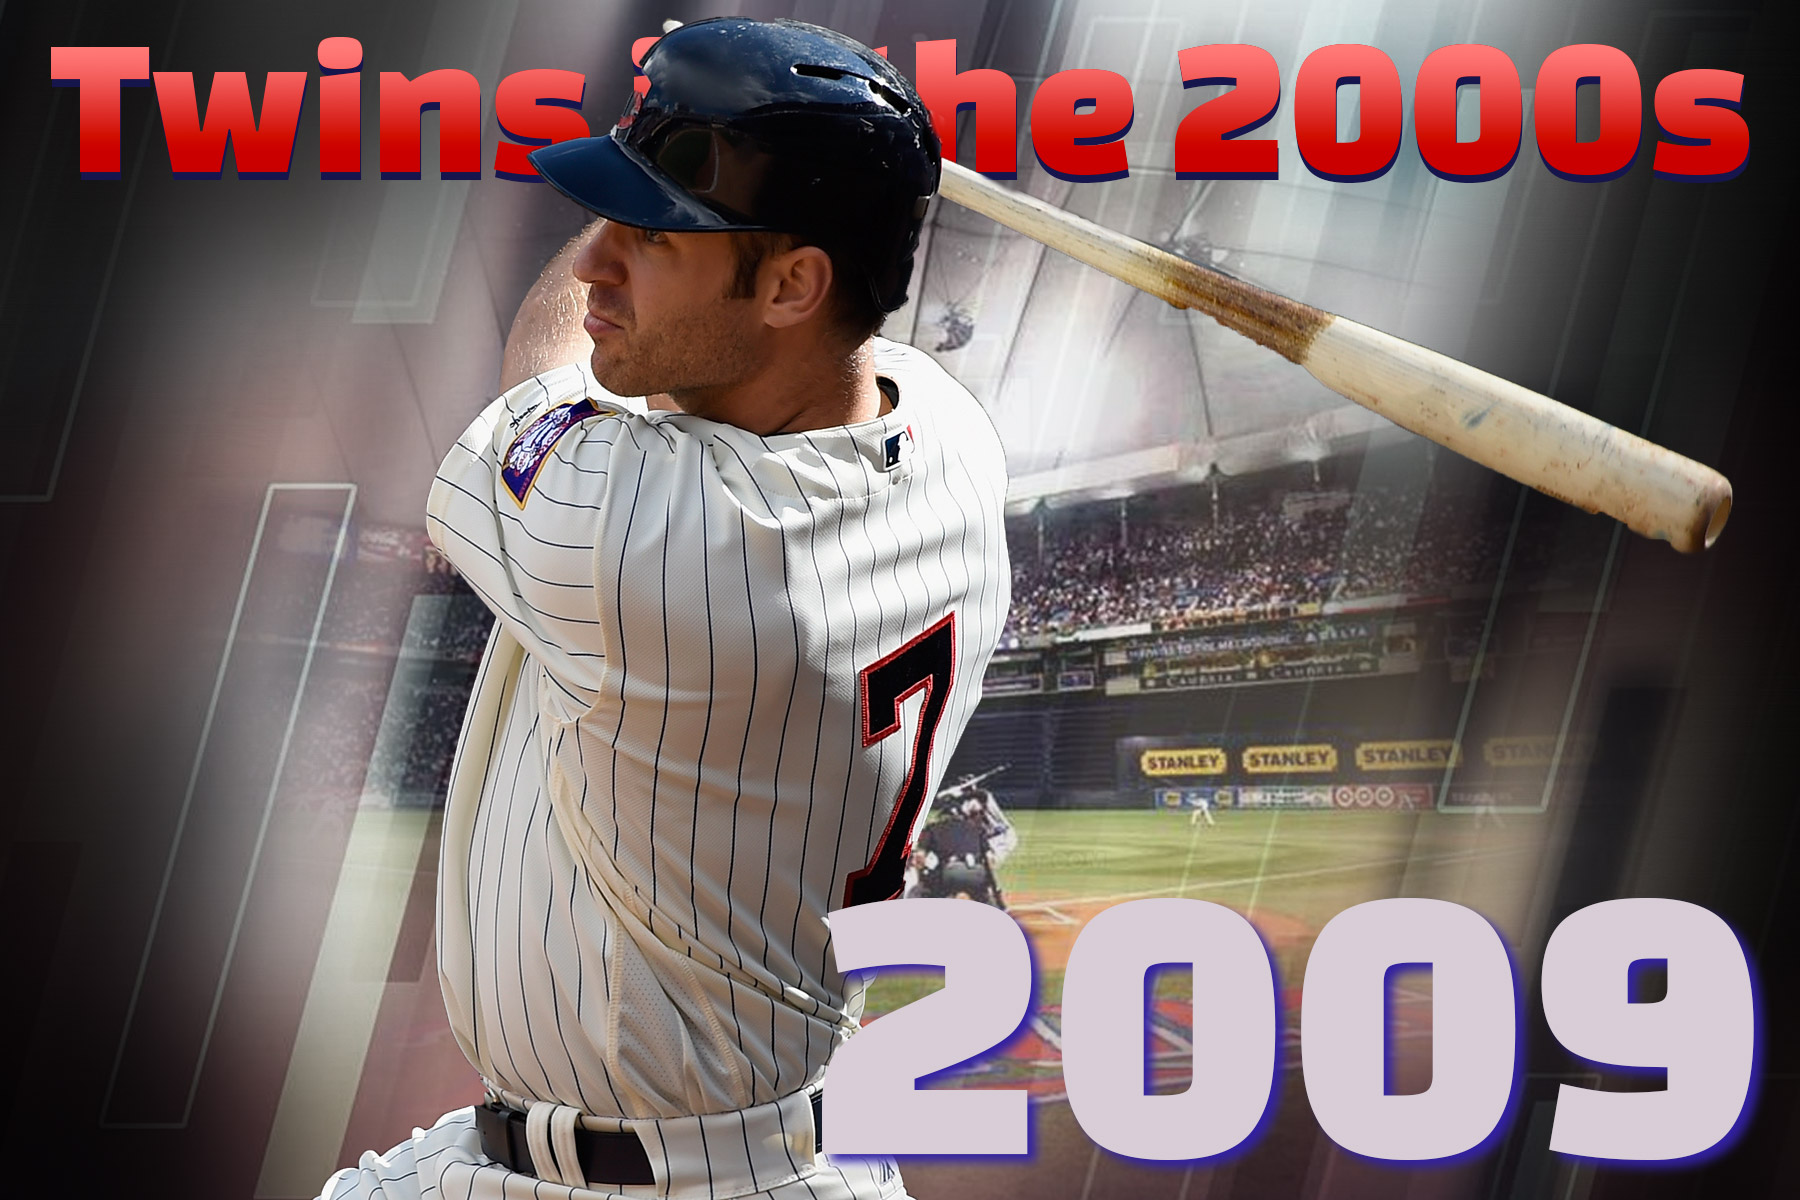 This is a 2009 photo of Joe Crede of the Minnesota Twins baseball